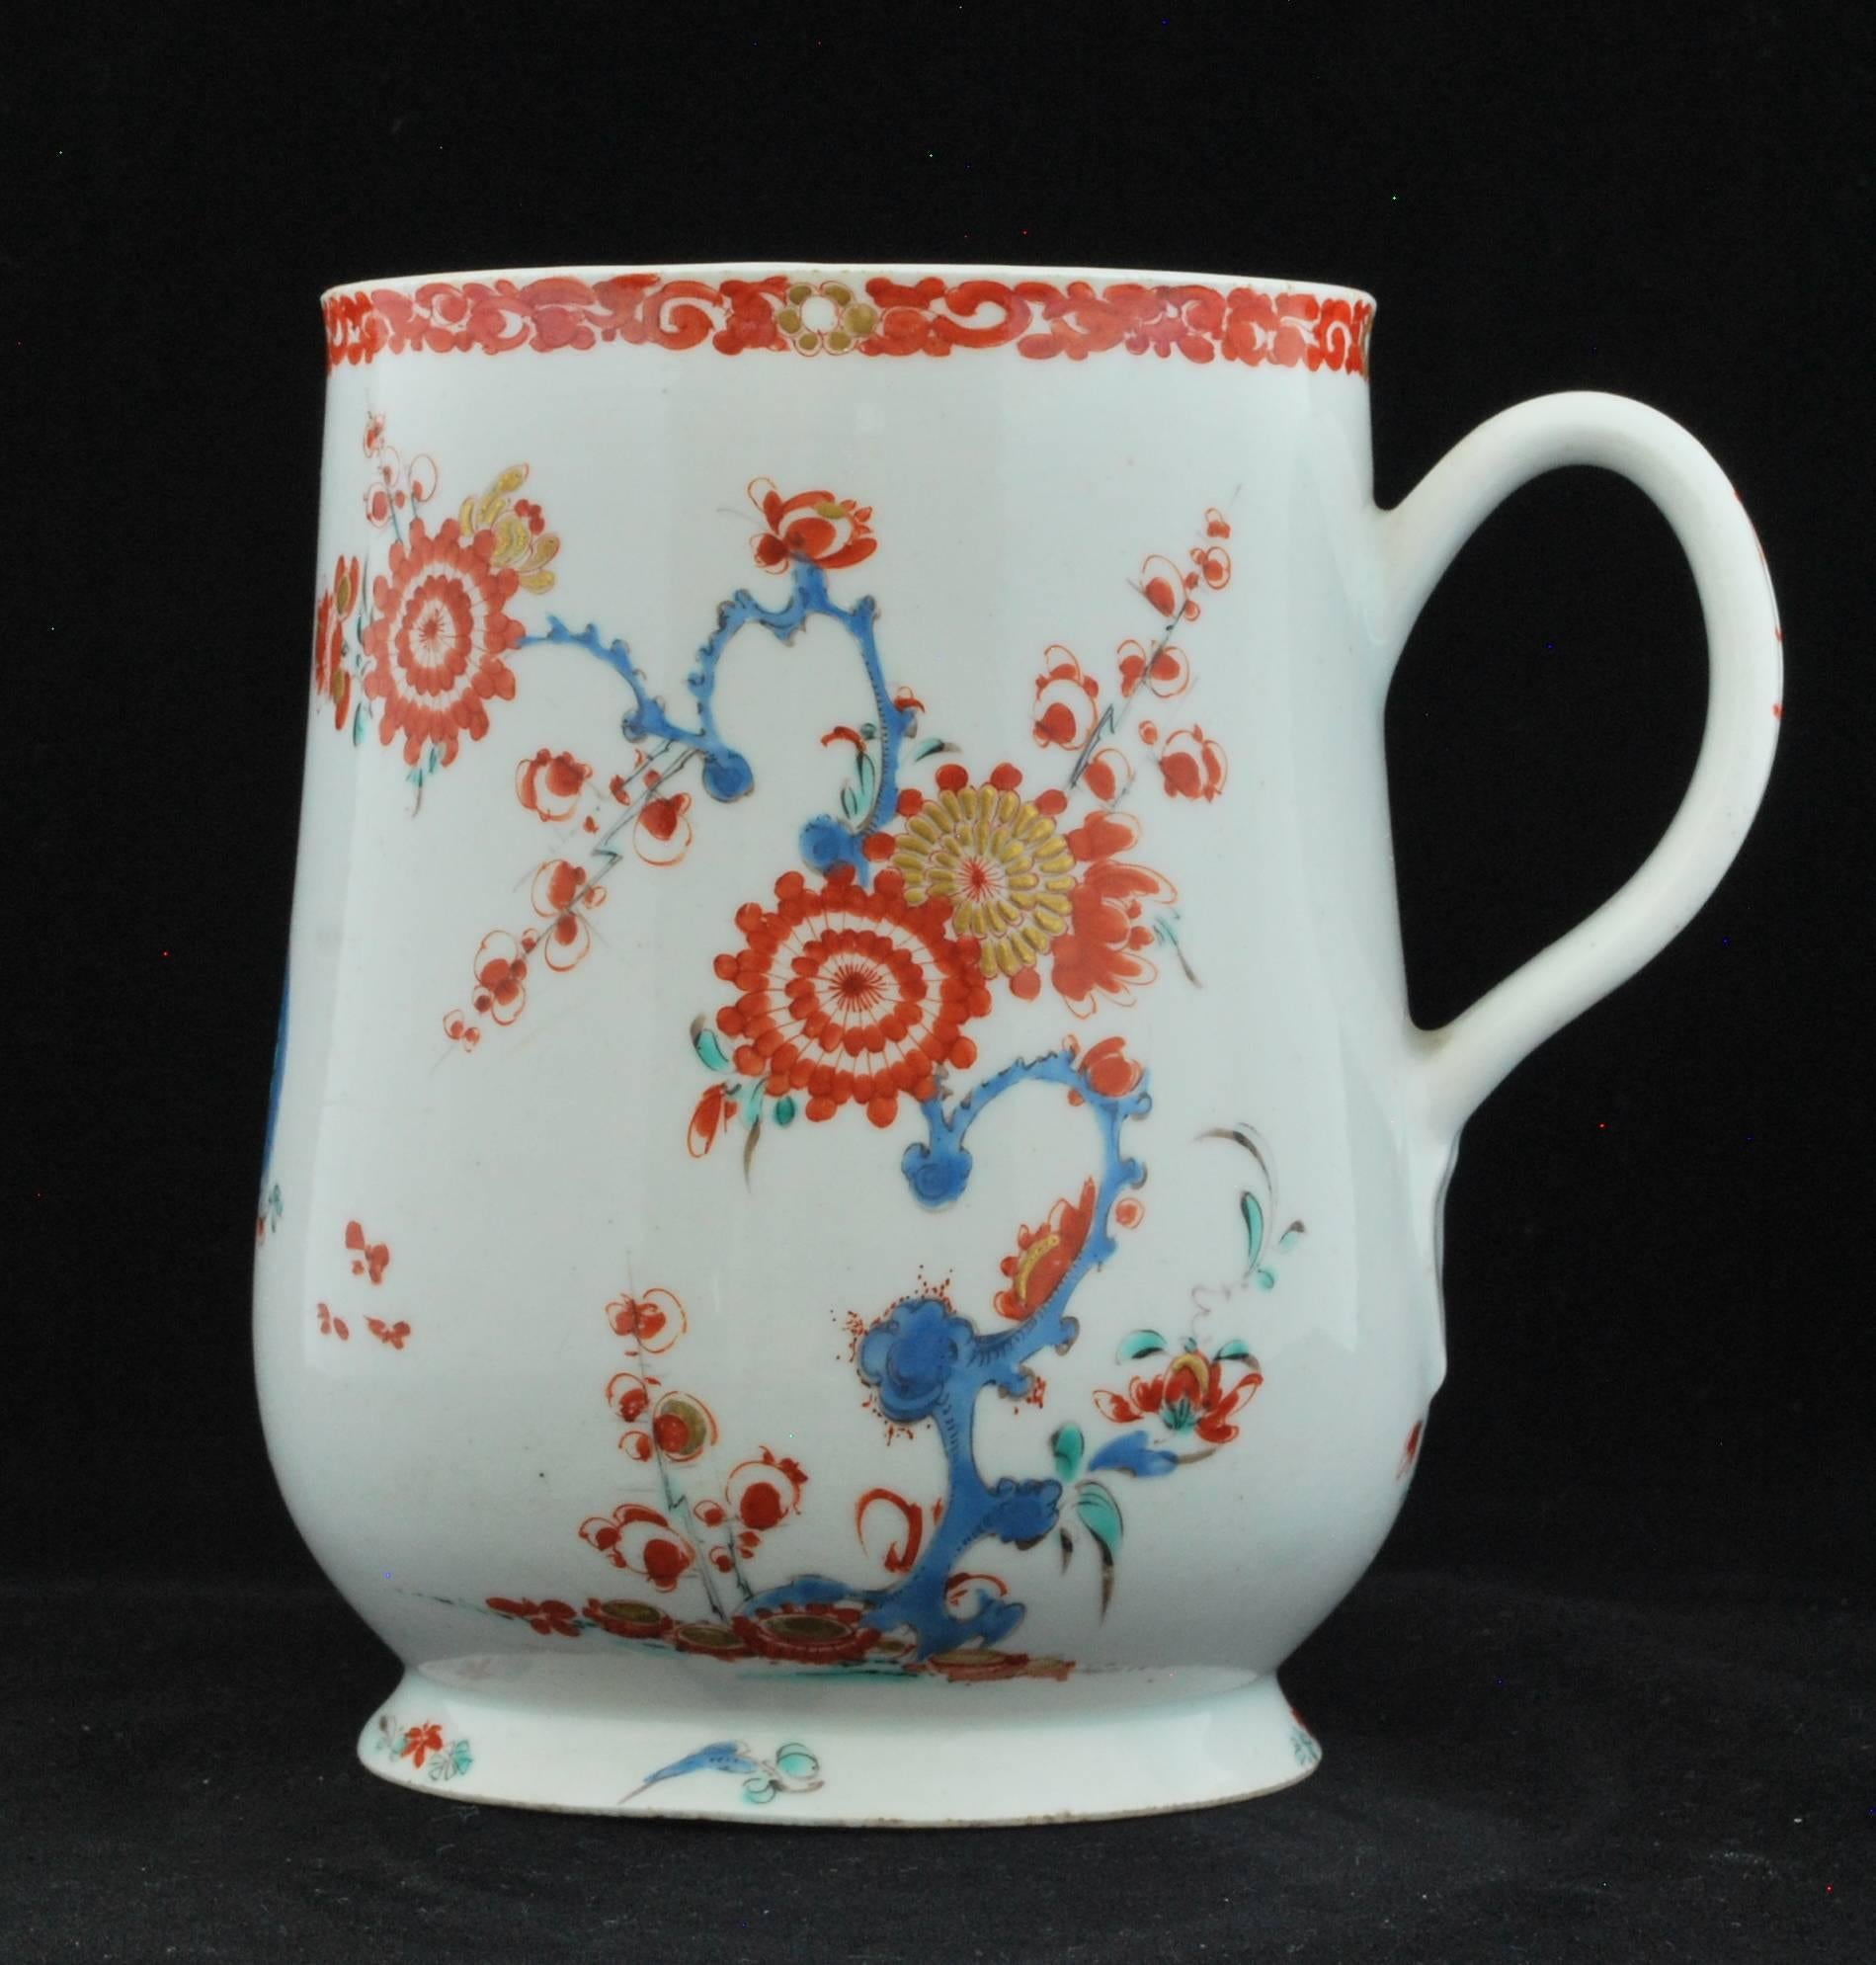 Pint mug of baluster form with flared base and grooved strap-handle with heart-shaped termination. The face of the mug painted after the Kakiemon with the two Quail pattern. The reverse painted with a kikyo bush and with scattered floral sprigs